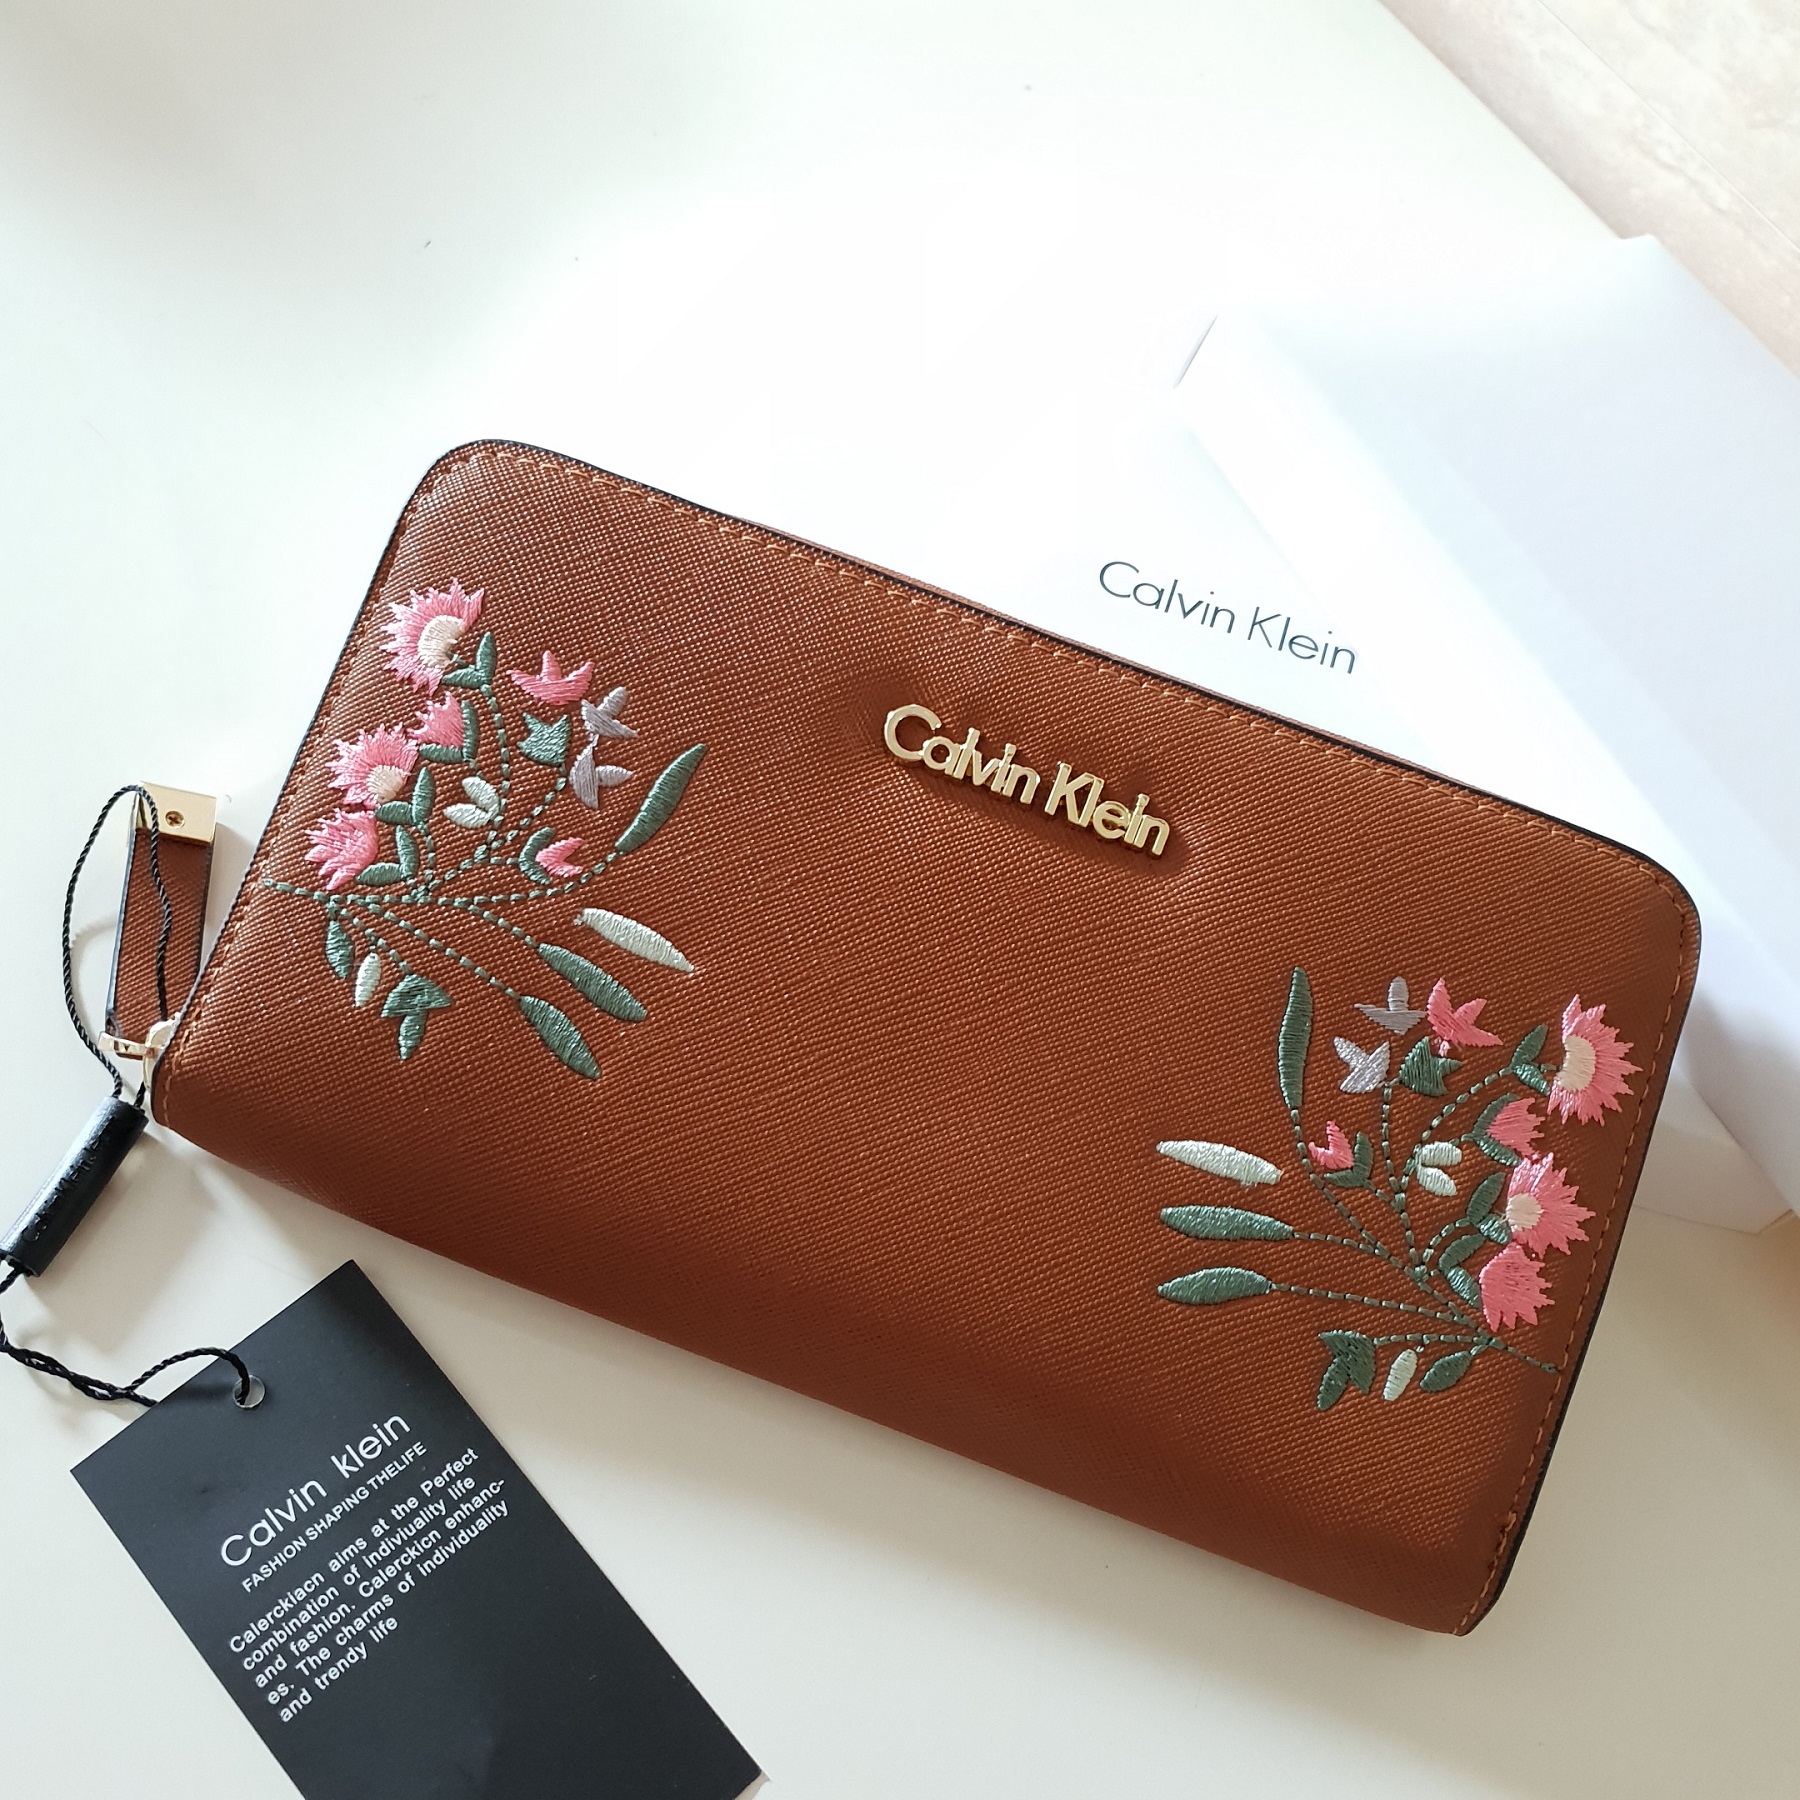 zout erosie Prijs C.A.L.V.I.N K.L.E.I.N Women's Wallet - Long Zip Saffiano Leather Wallet  with Floral Embroidery | Lazada PH